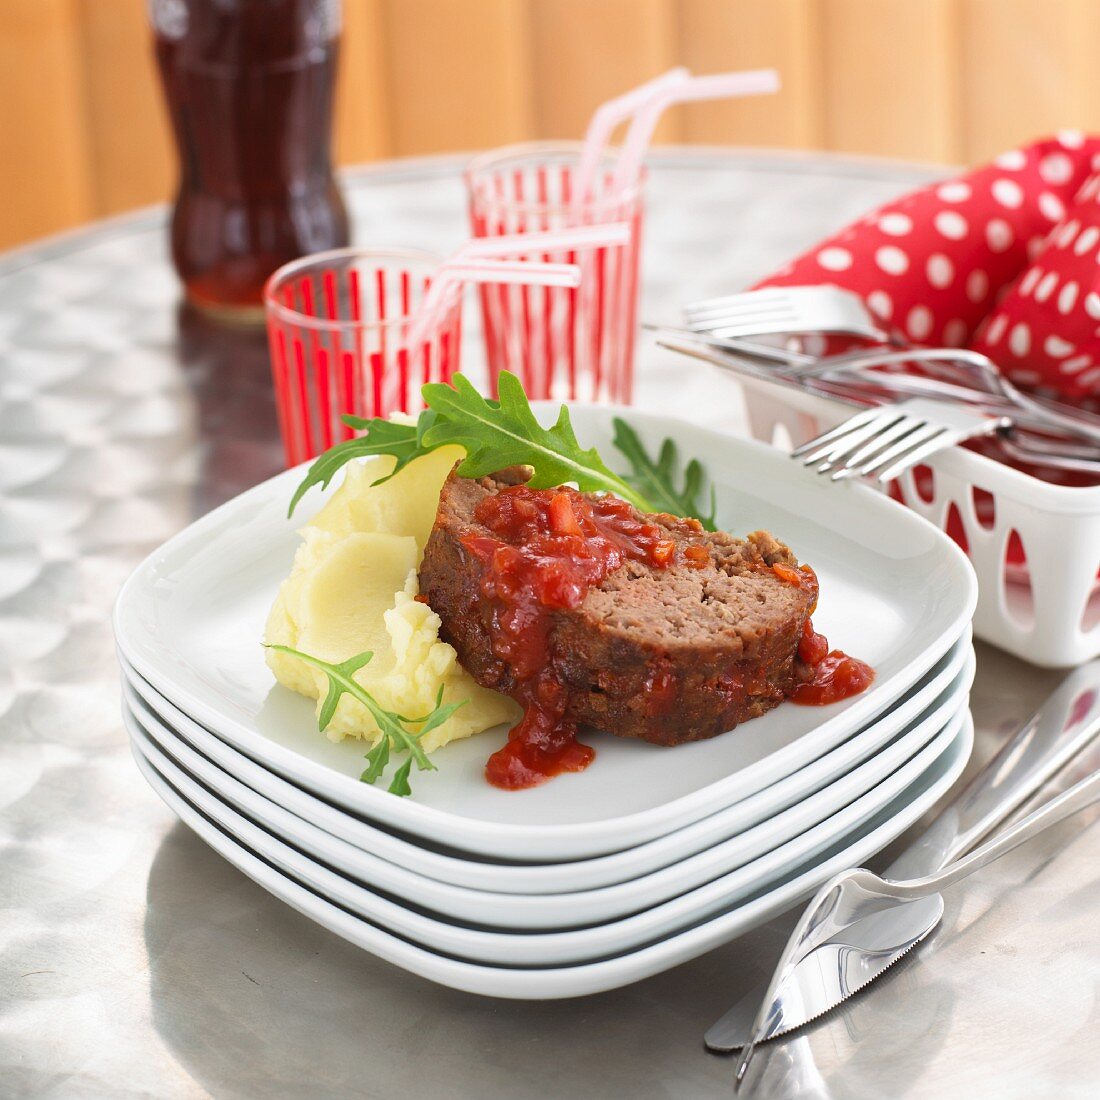 Meatloaf with mashed potatoes and tomato sauce